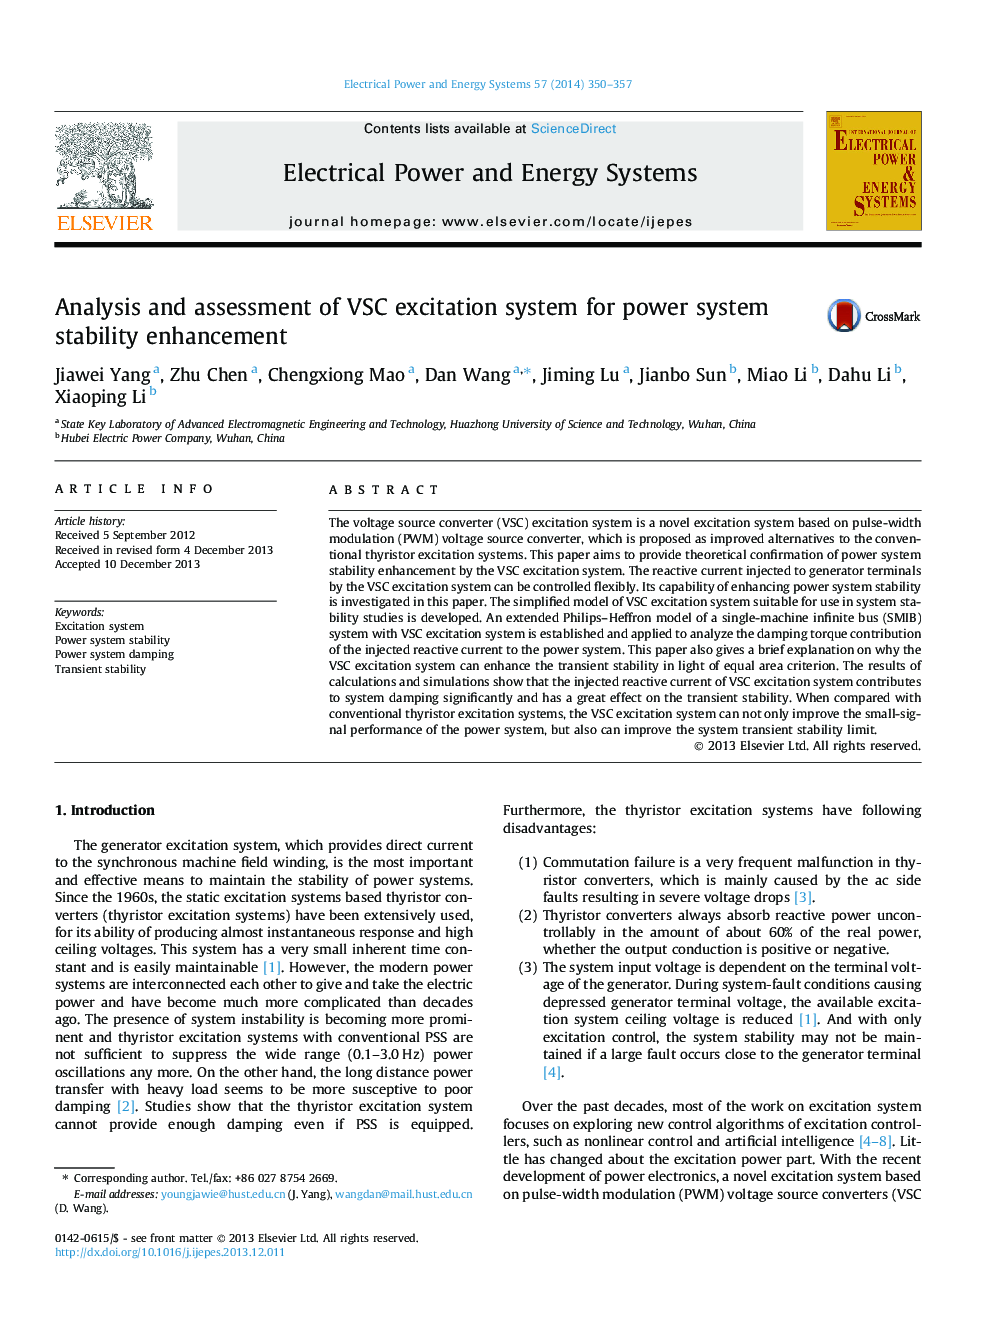 Analysis and assessment of VSC excitation system for power system stability enhancement